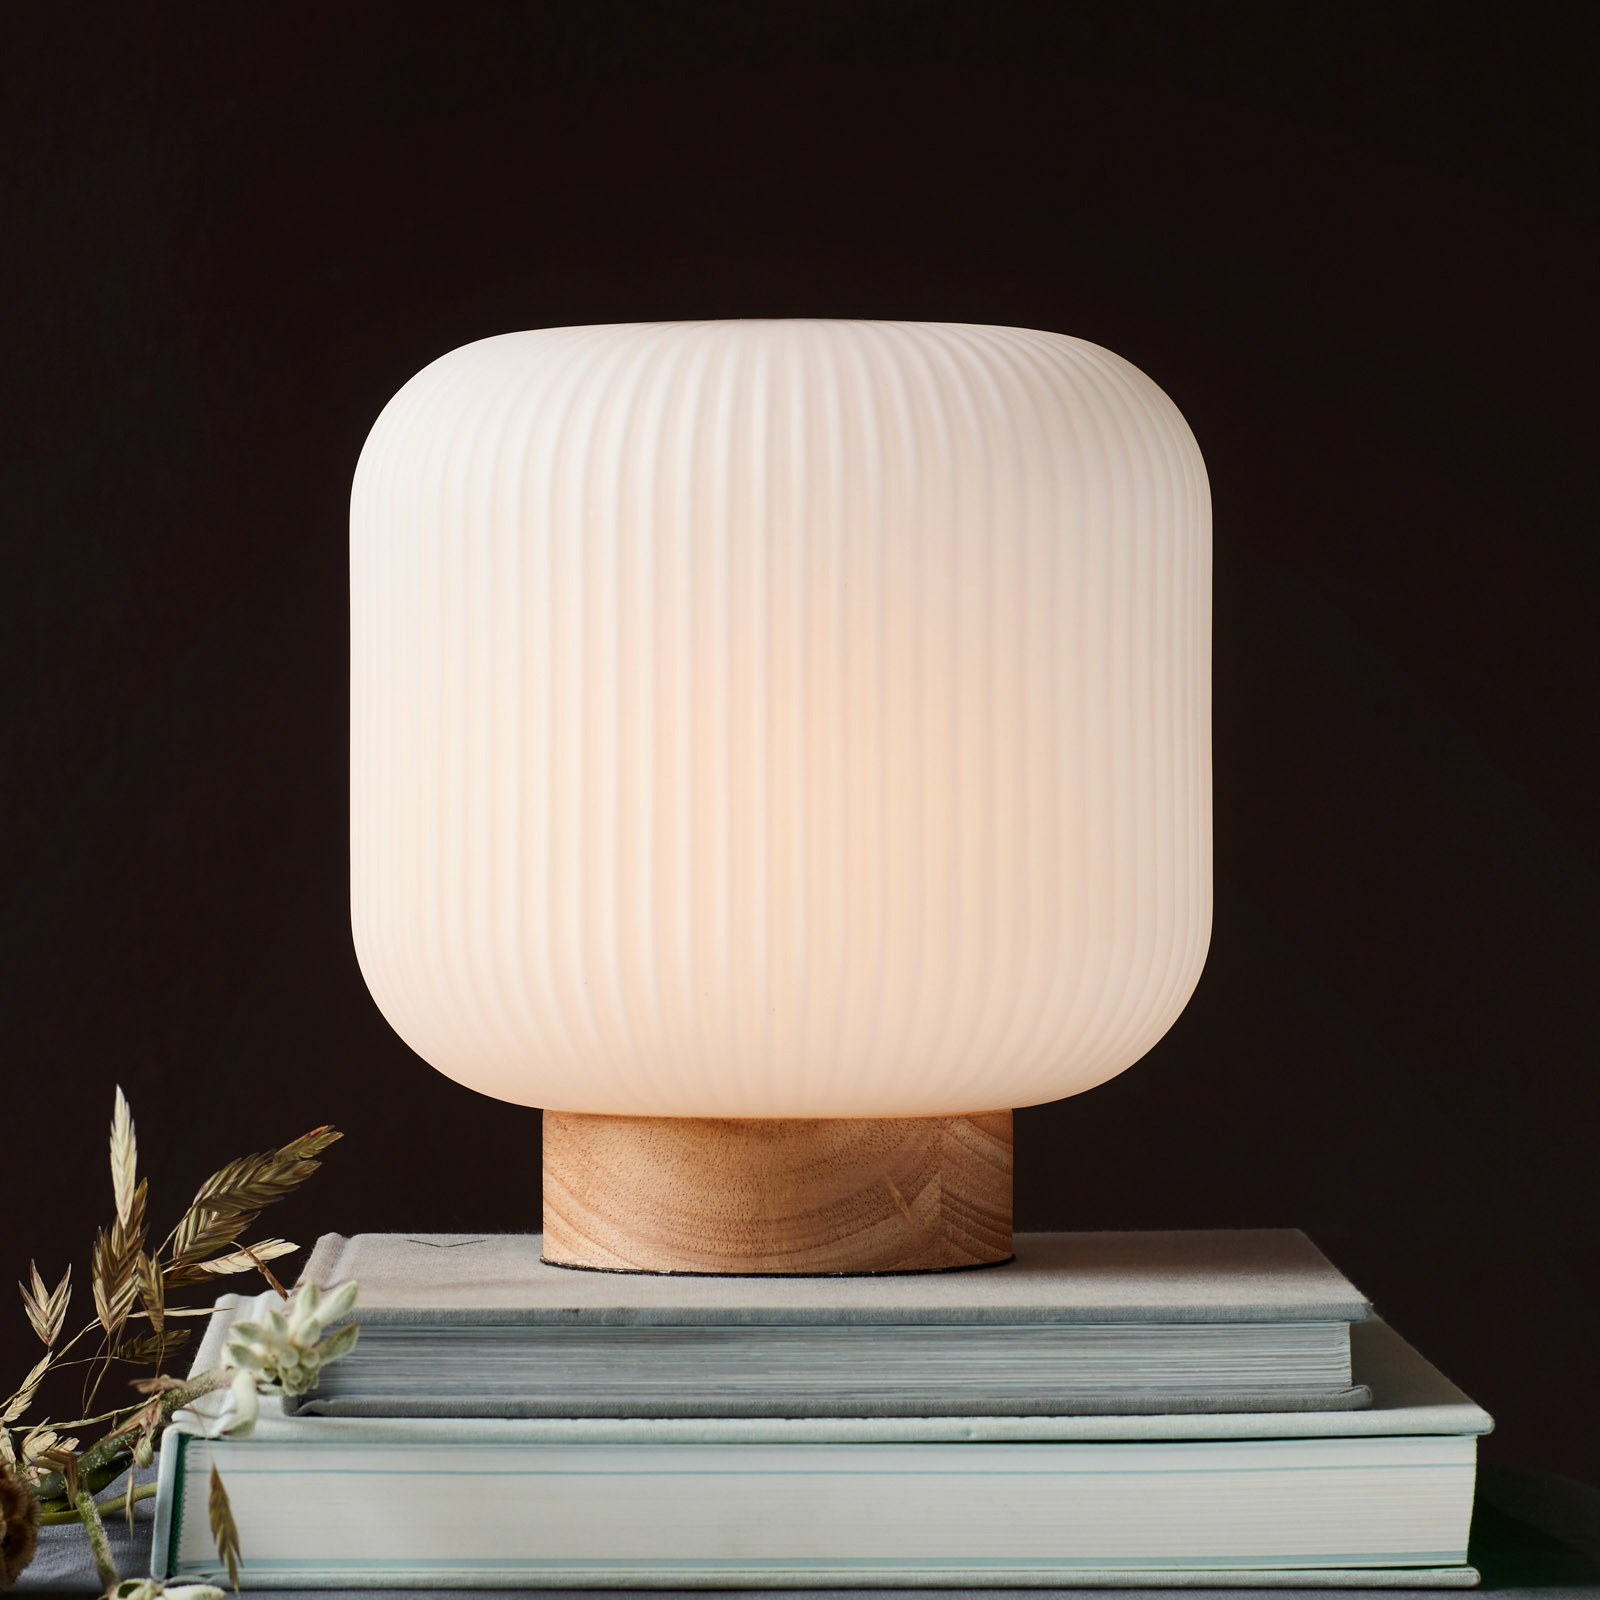 Milford table lamp, glass lampshade, wooden base